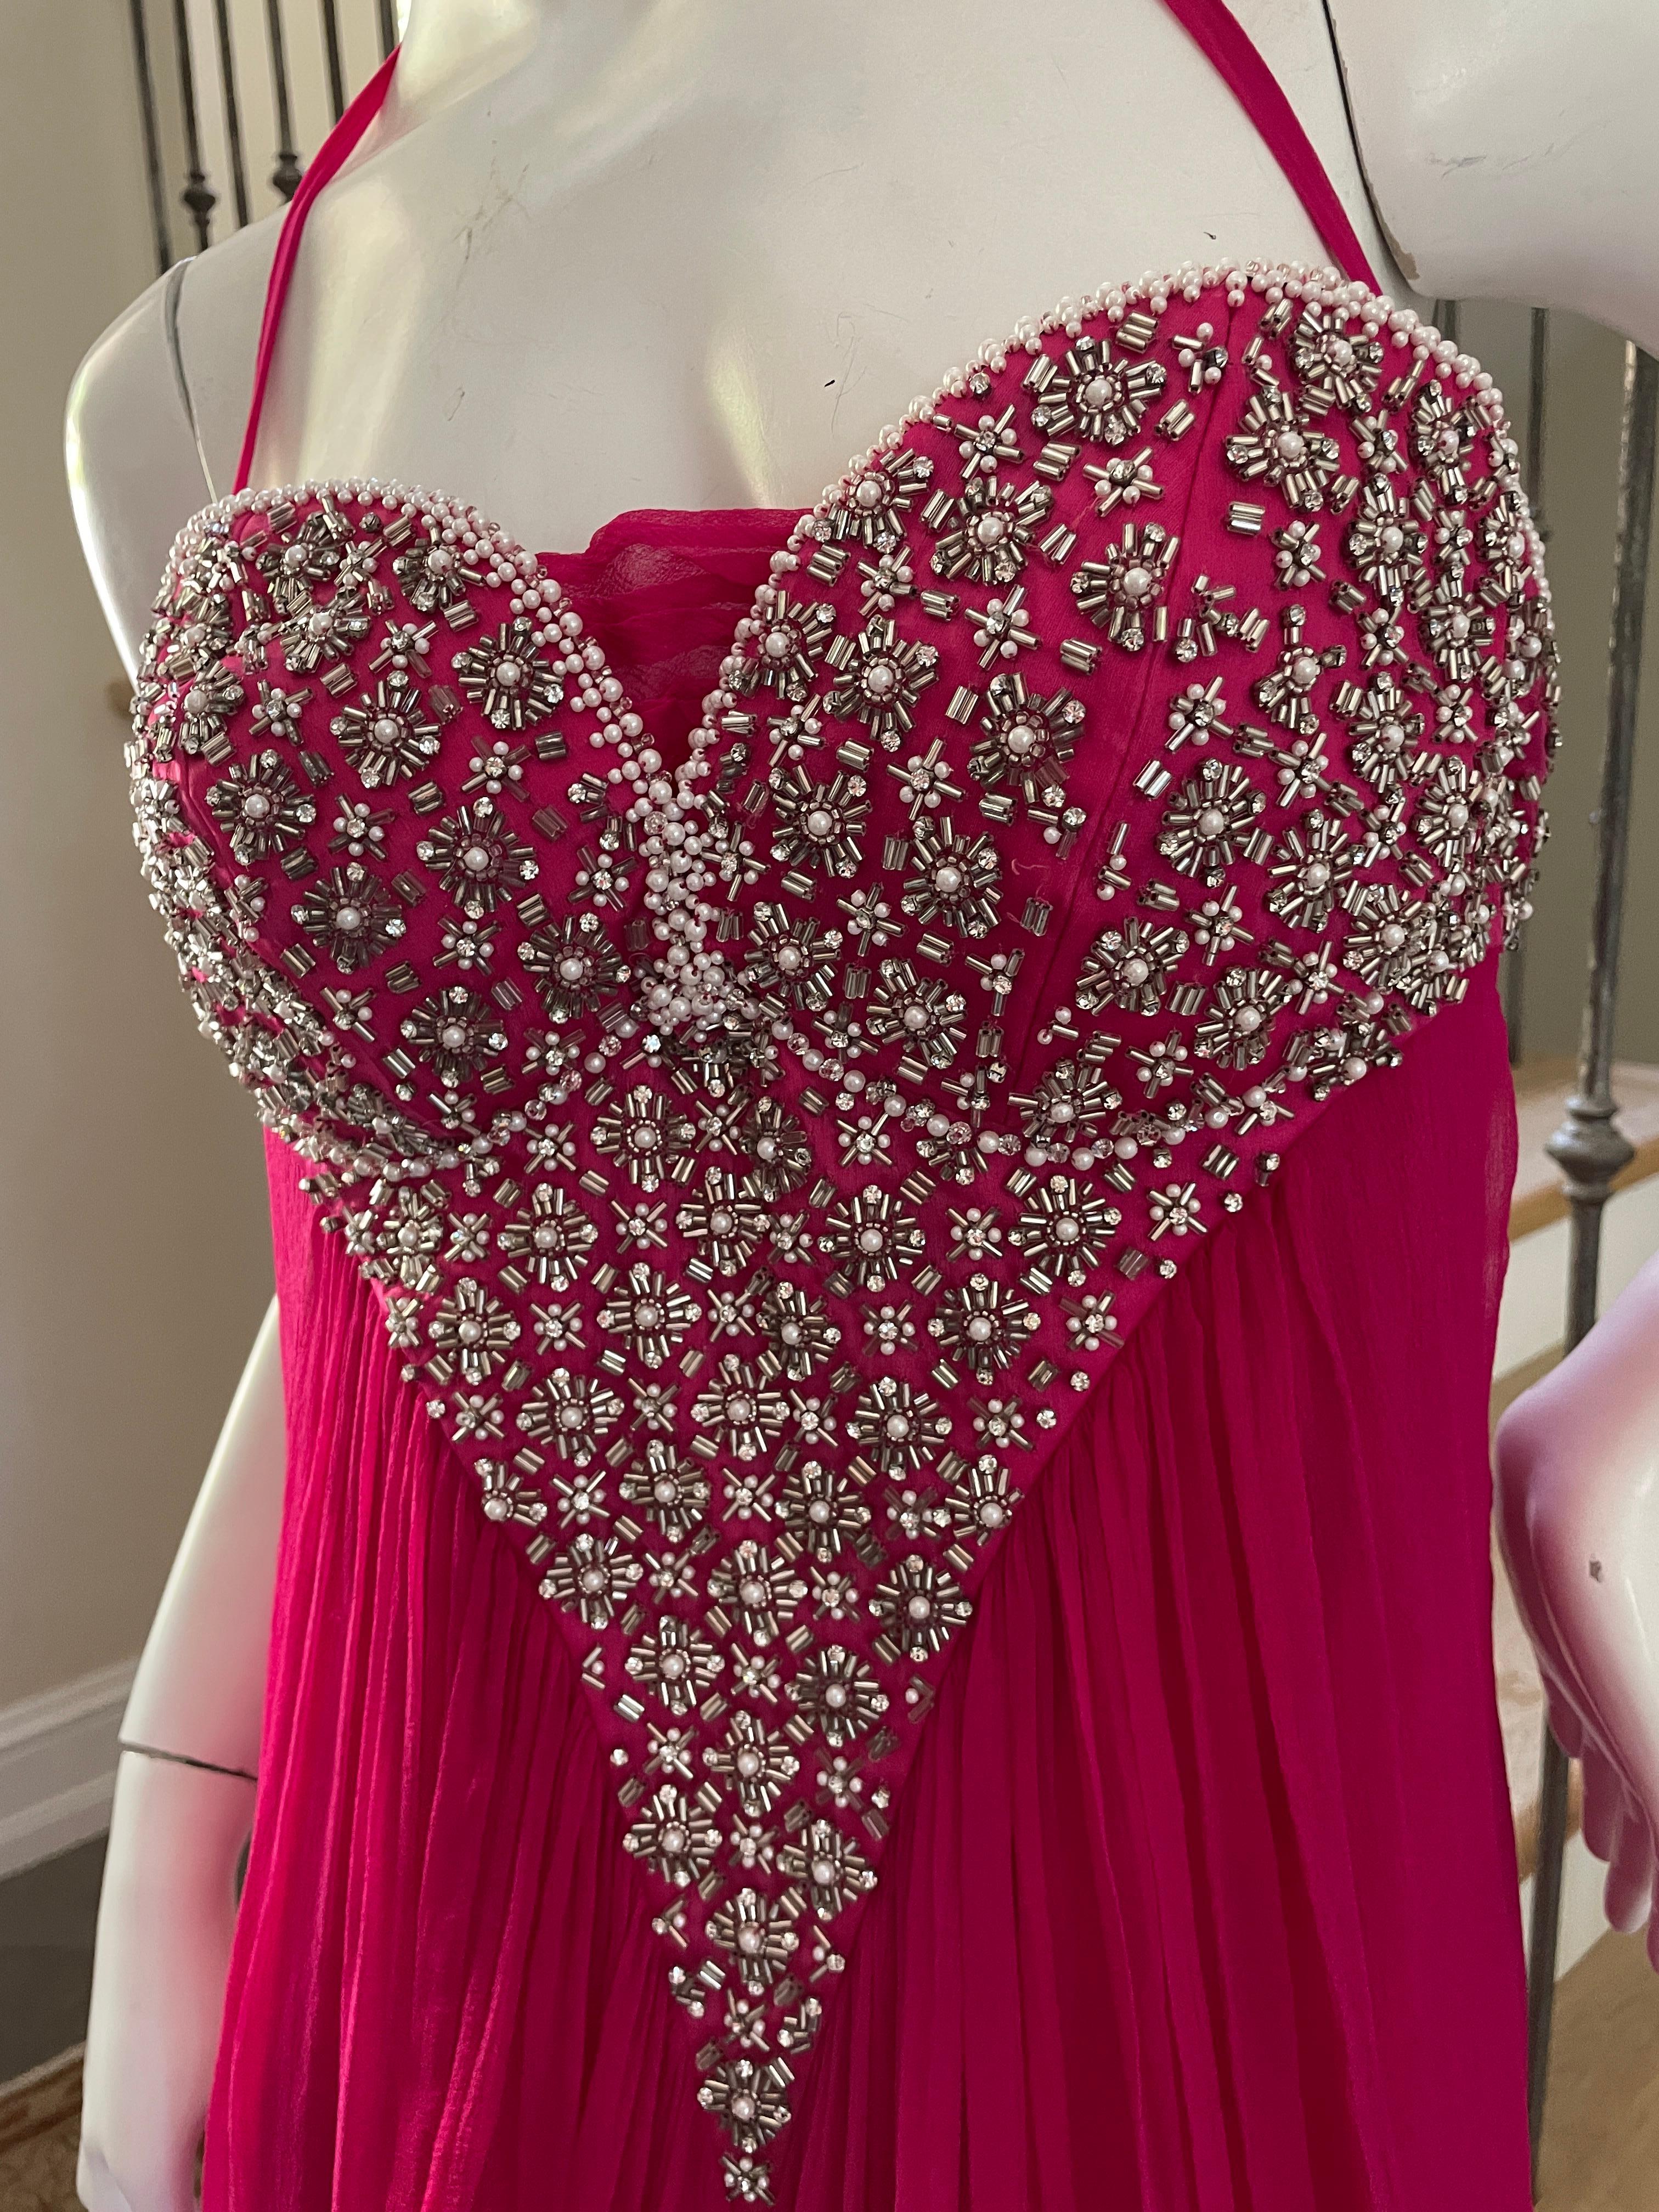 Roberto Cavalli Vintage Coral Red Silk Evening Dress with Beaded Corset In Excellent Condition For Sale In Cloverdale, CA